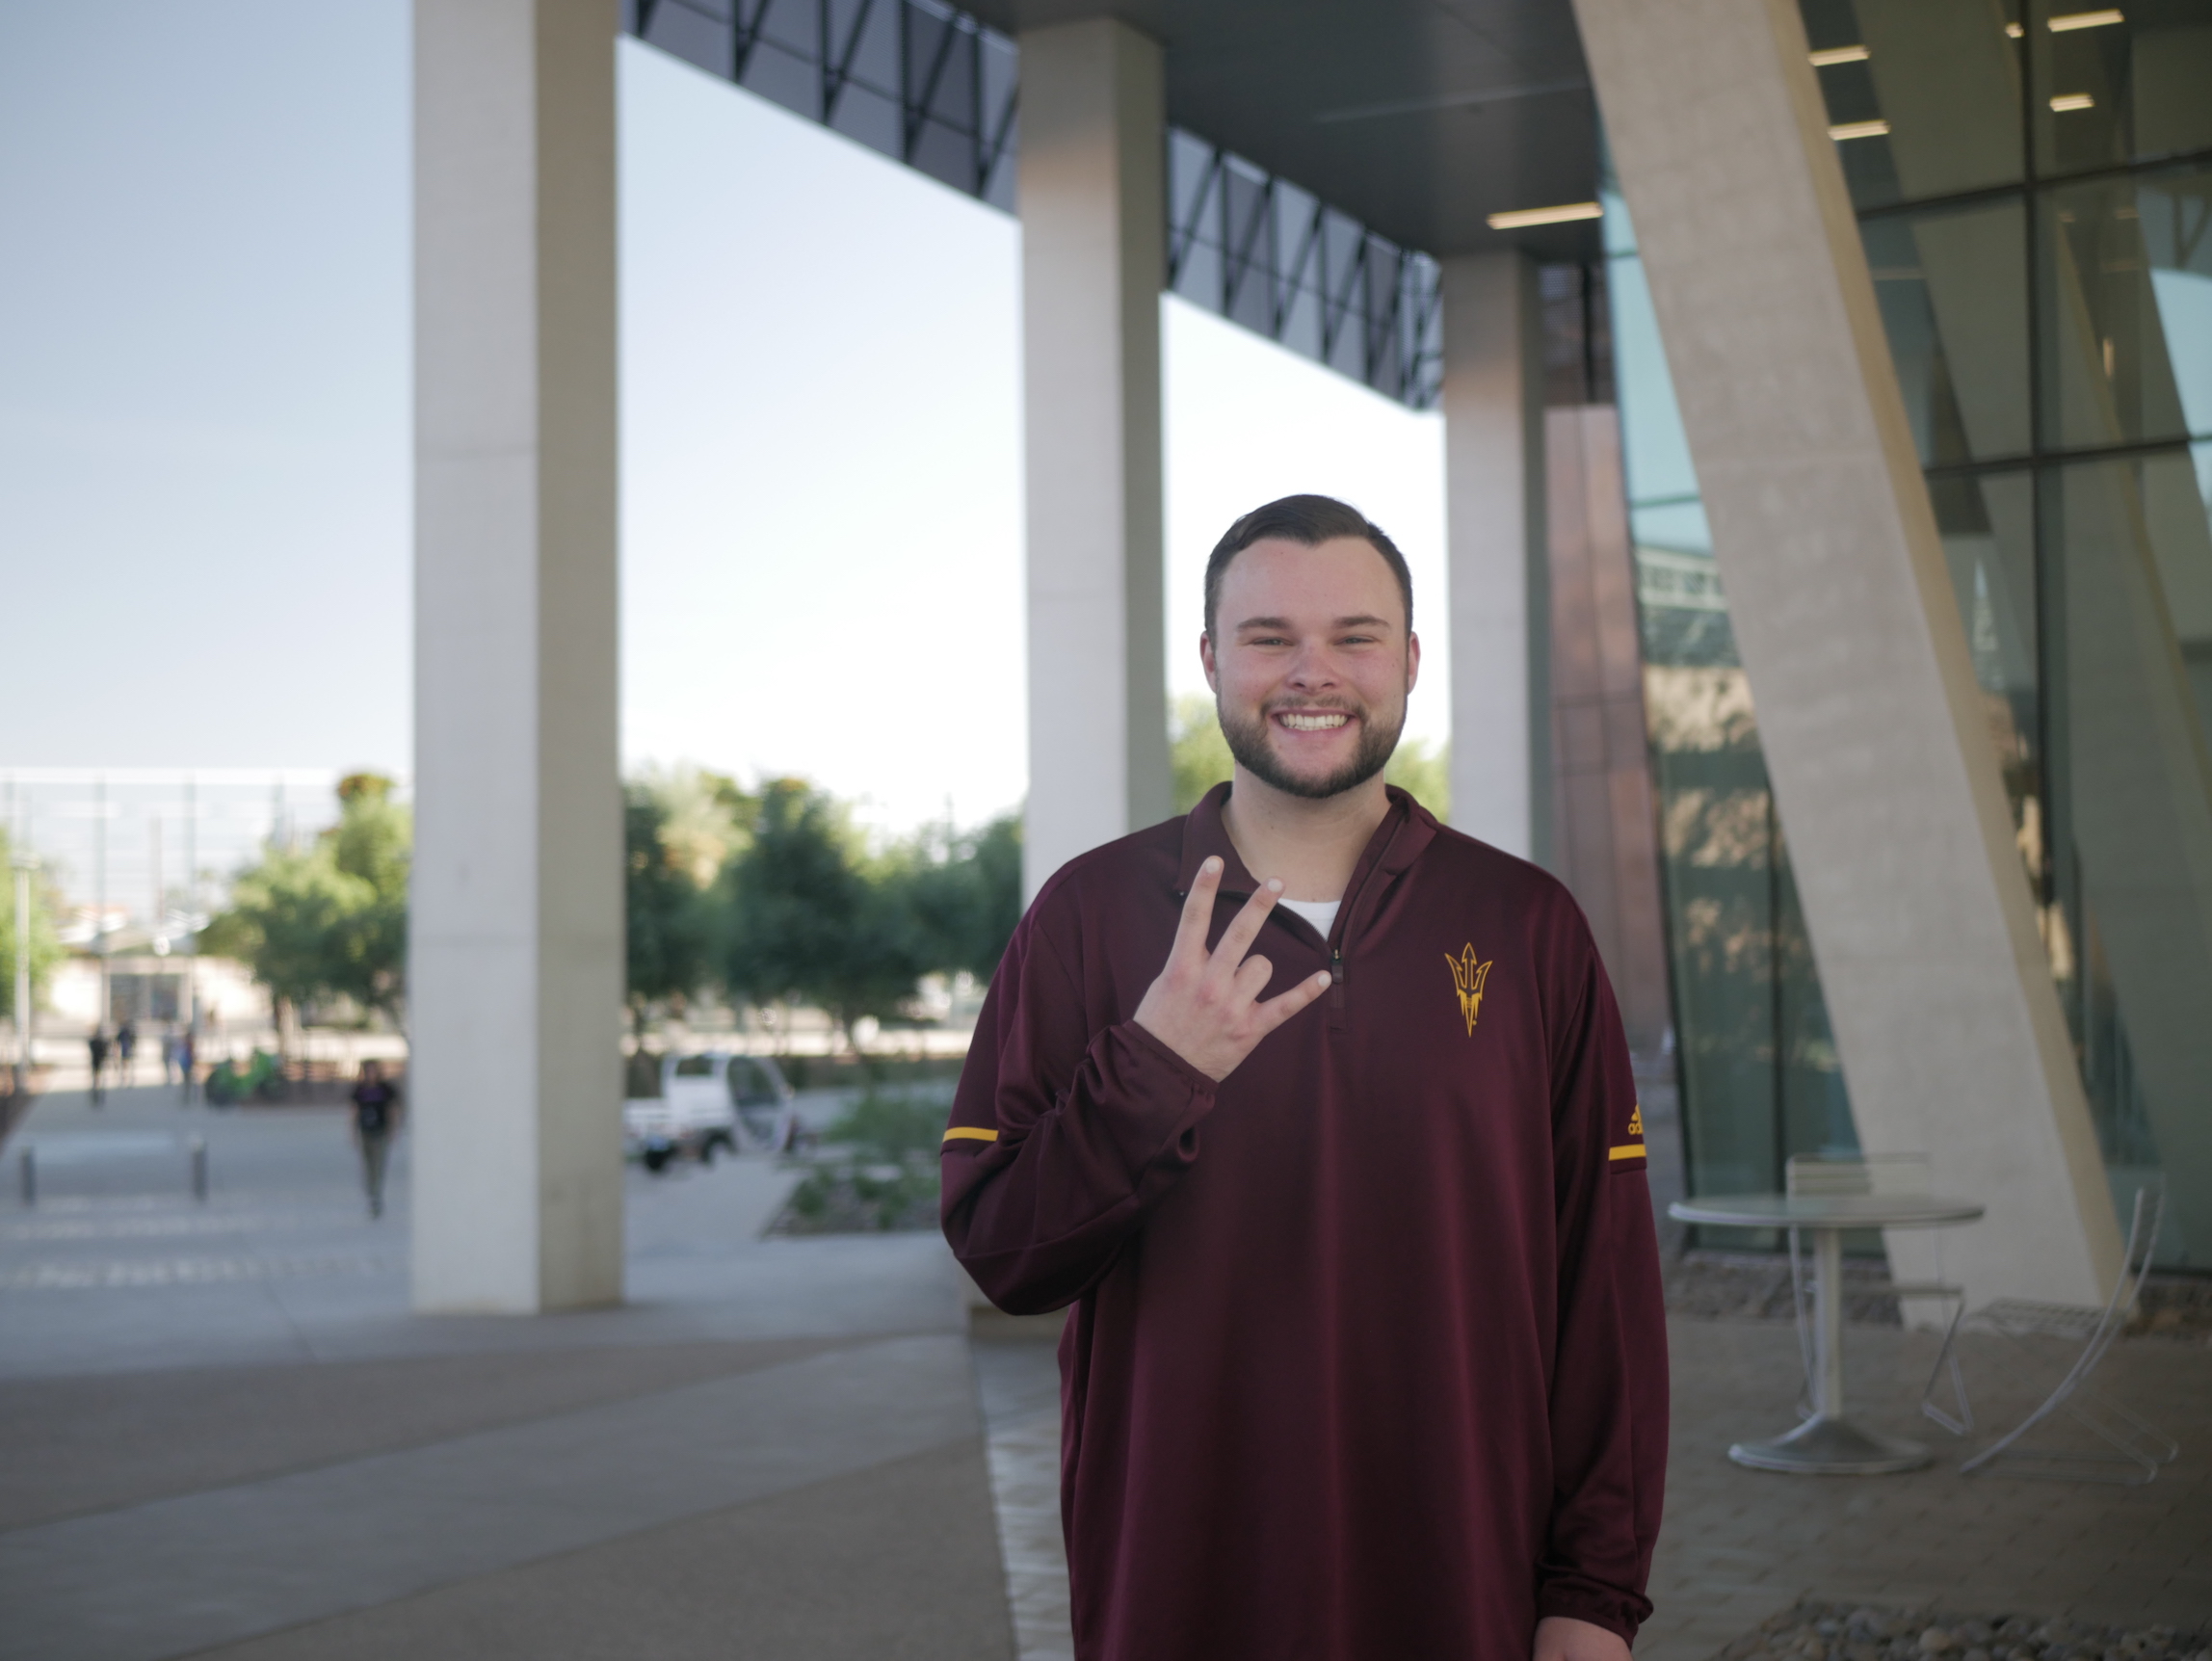 Conferences, and camping trips ASU students have big spring